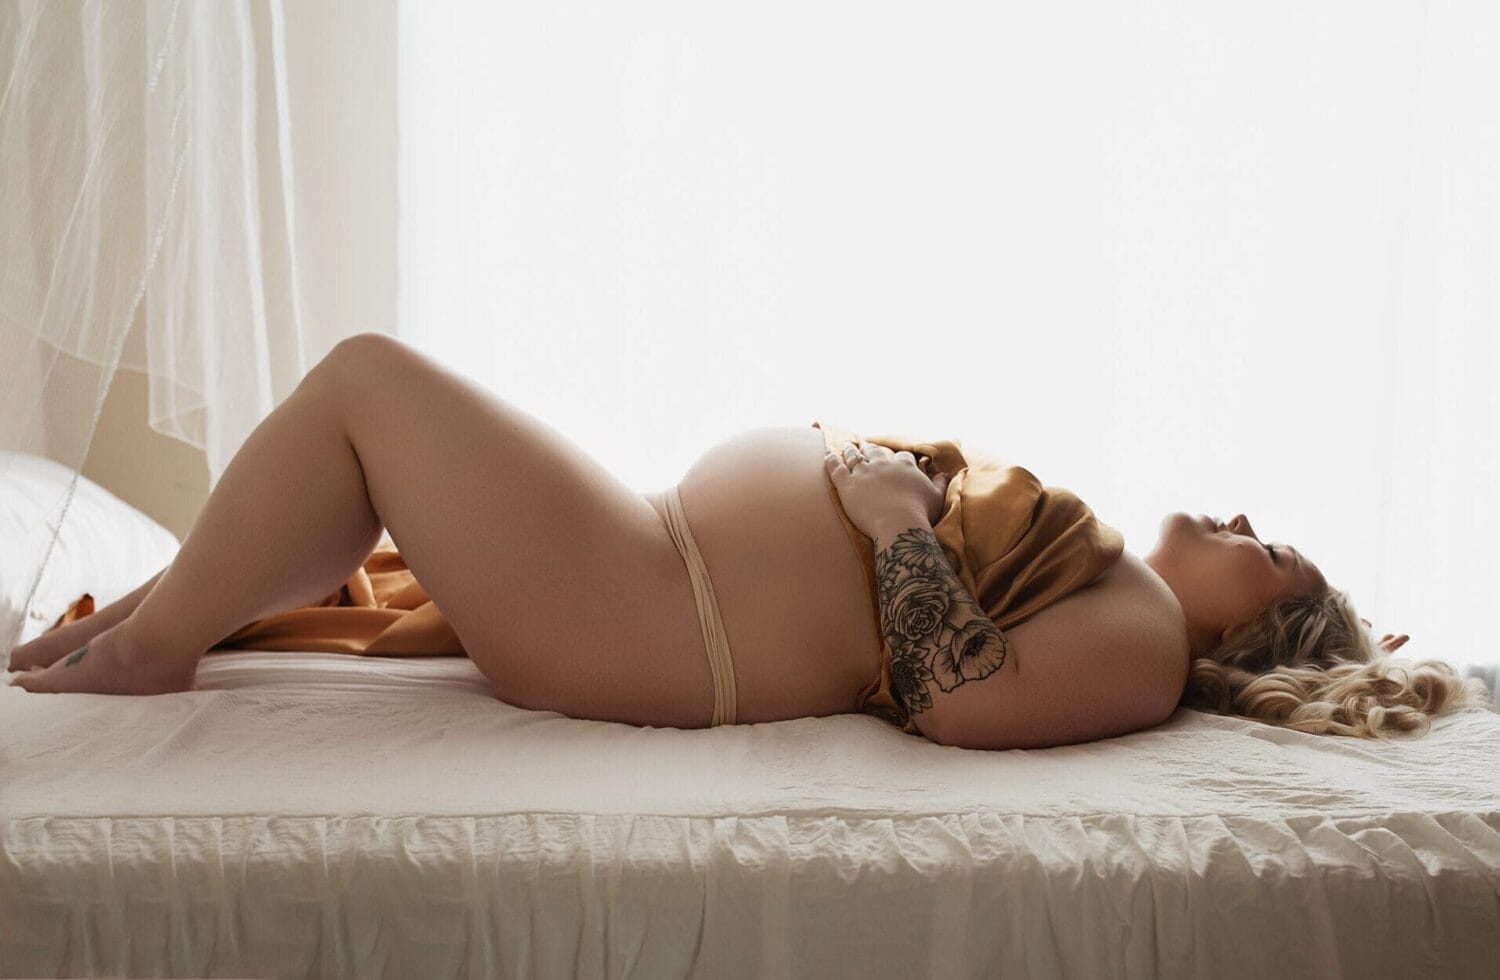 Pregnant mom in the studio lying on the bed with belly exposed.